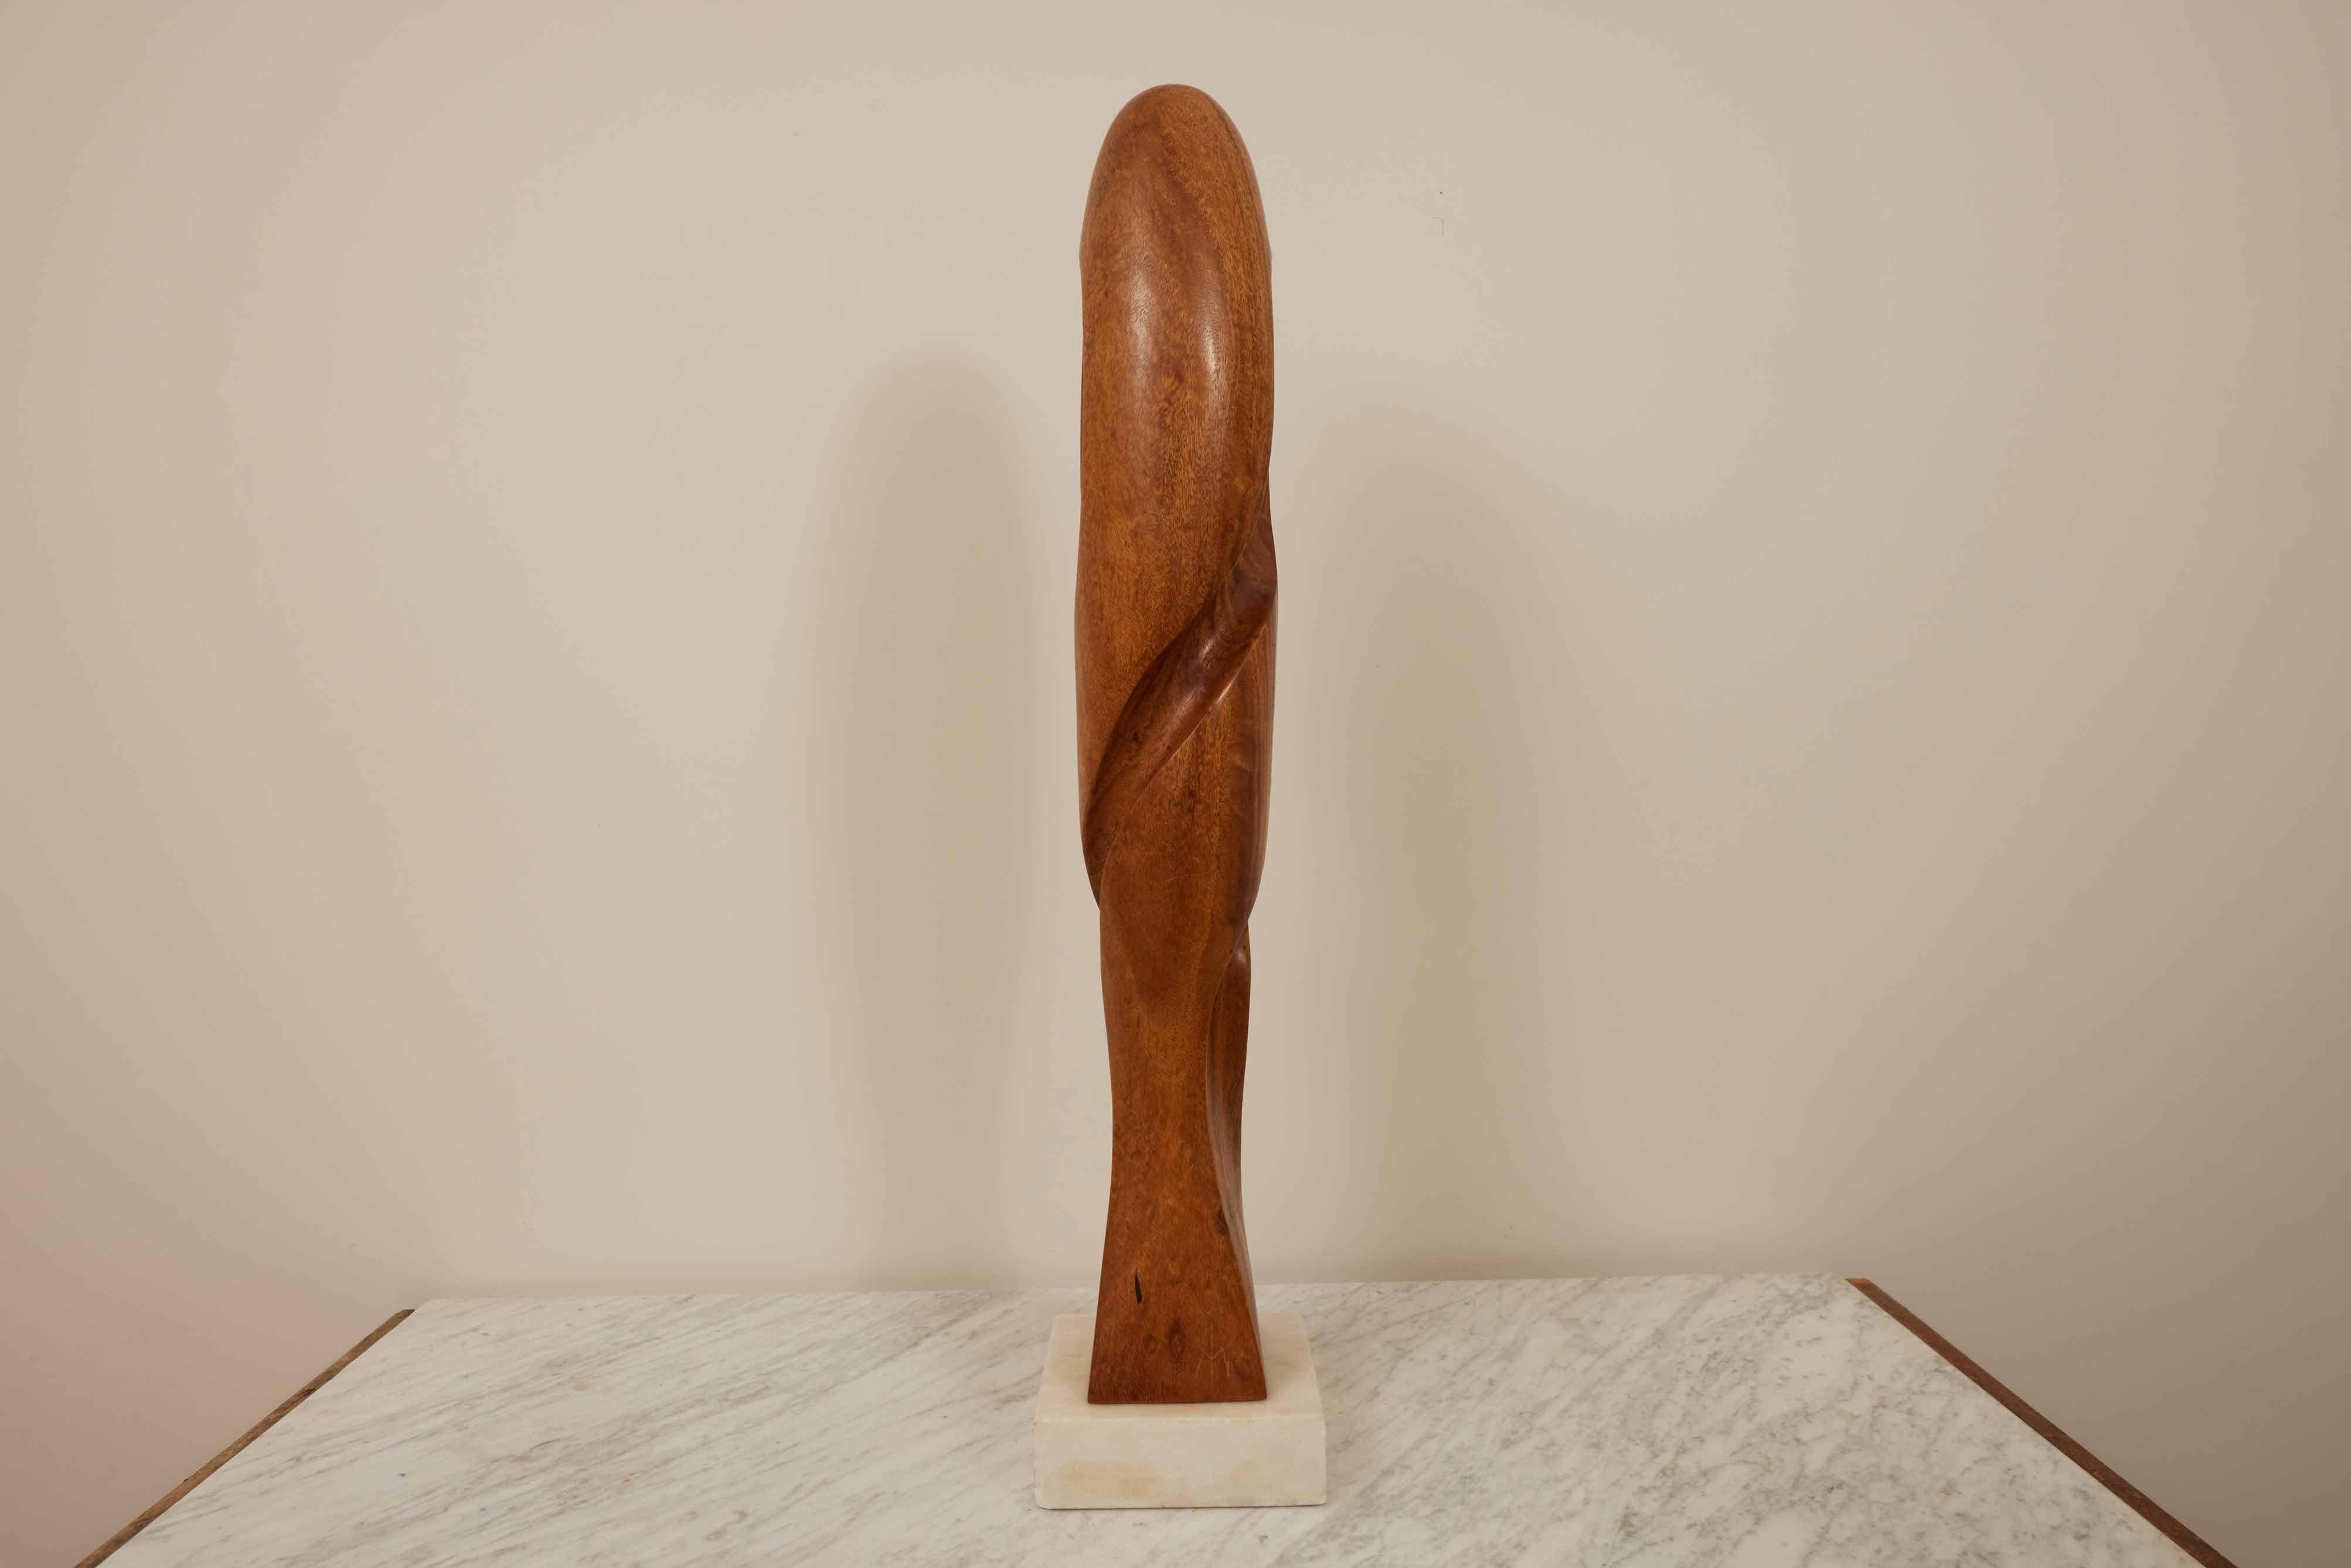  Henry Moretti Mahogany Sculpture  1970s For Sale 1